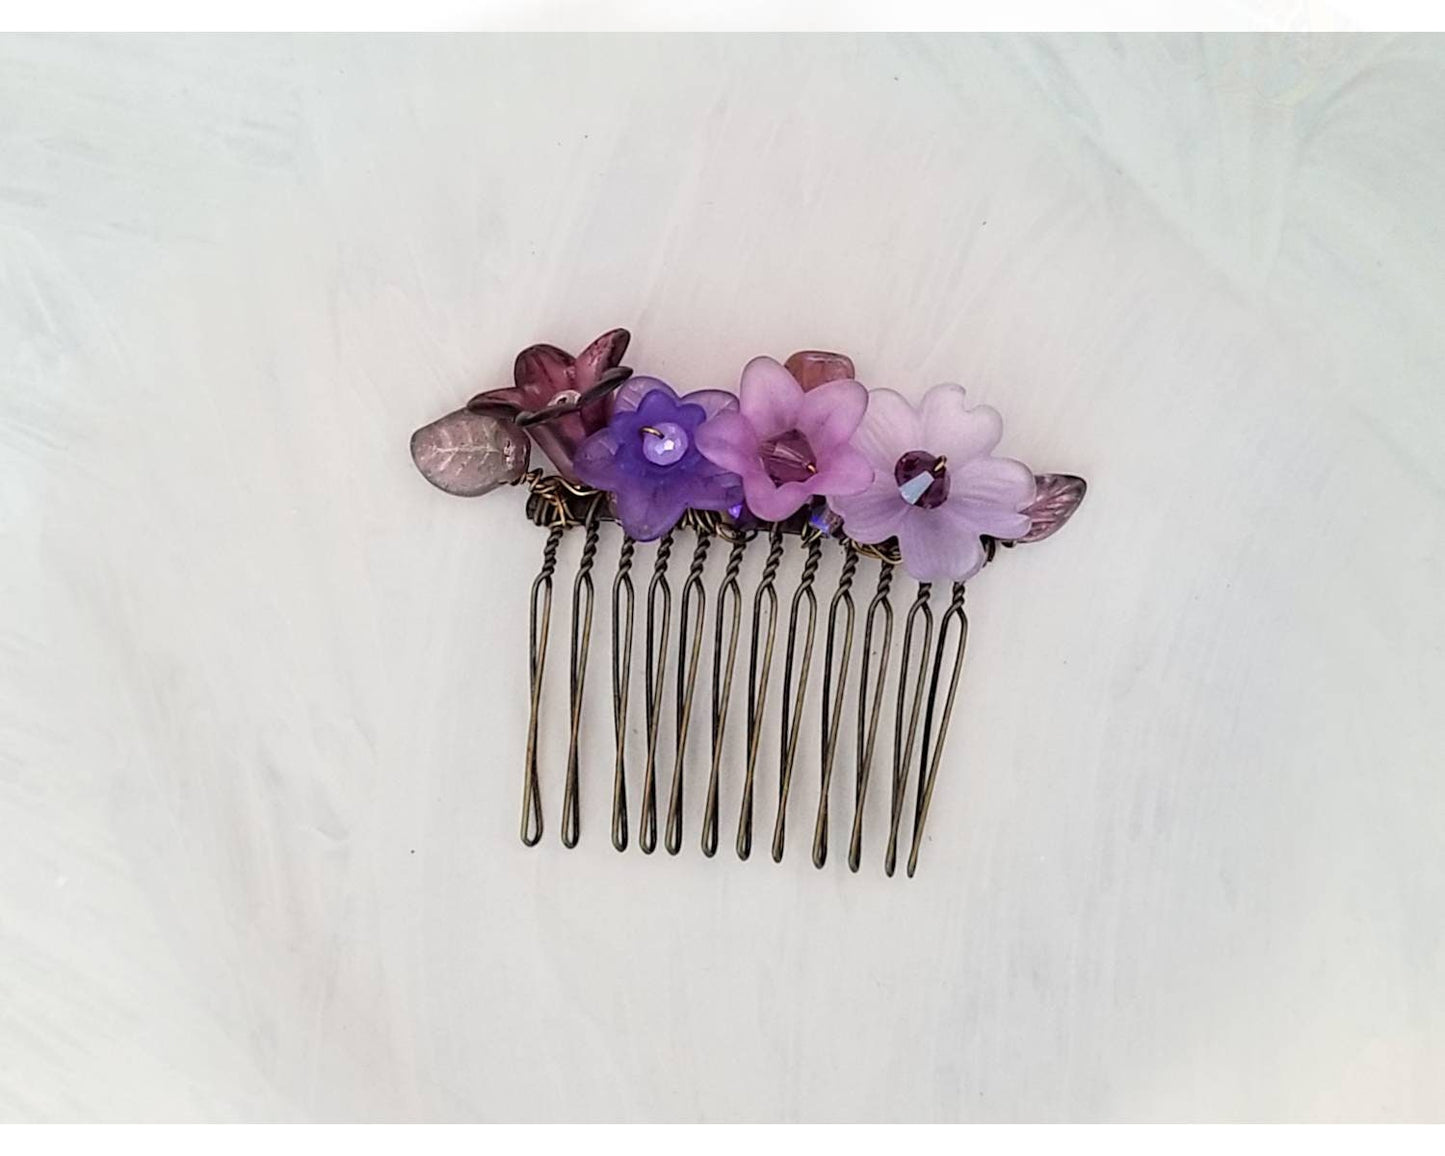 Wire Wrapped Lucite Flower Comb in Purple, Bridesmaid, Wedding, Floral, Garden, Party, Boho, Bohemian, Choice of Colors and Metals